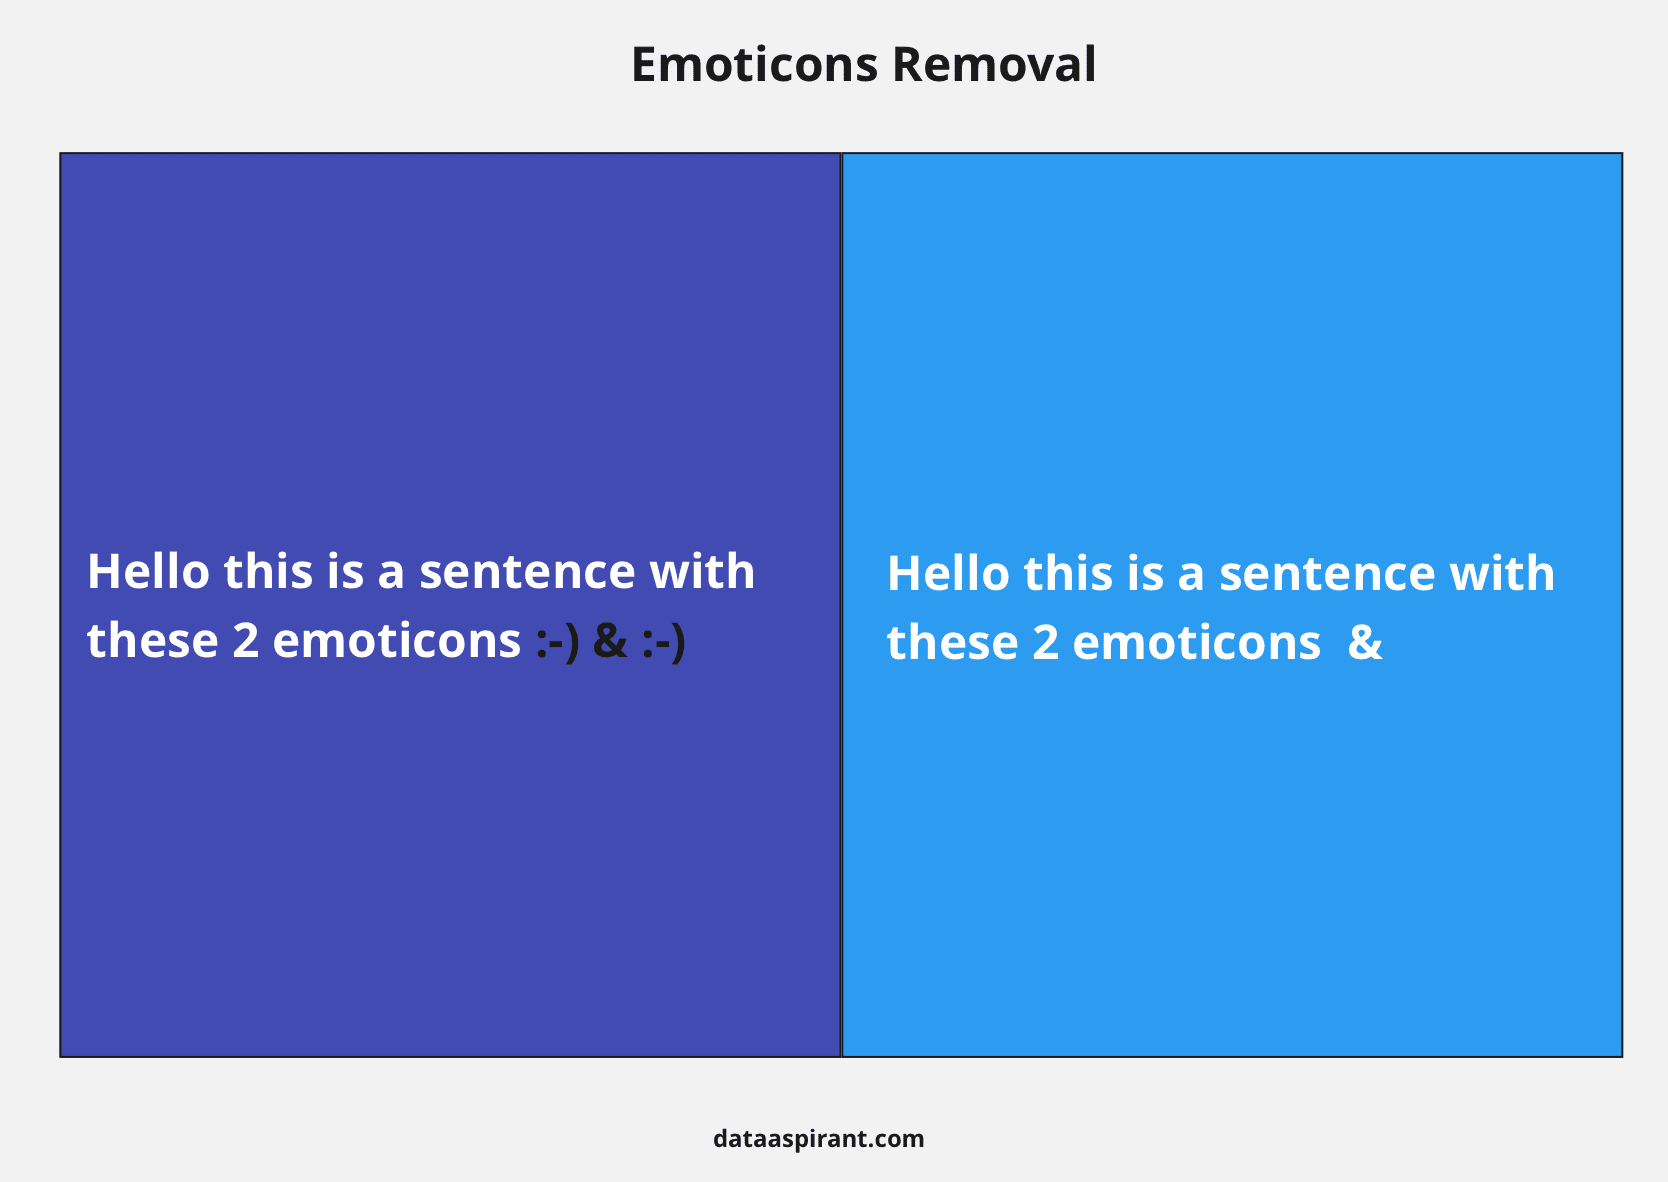 Emoticons Removal example